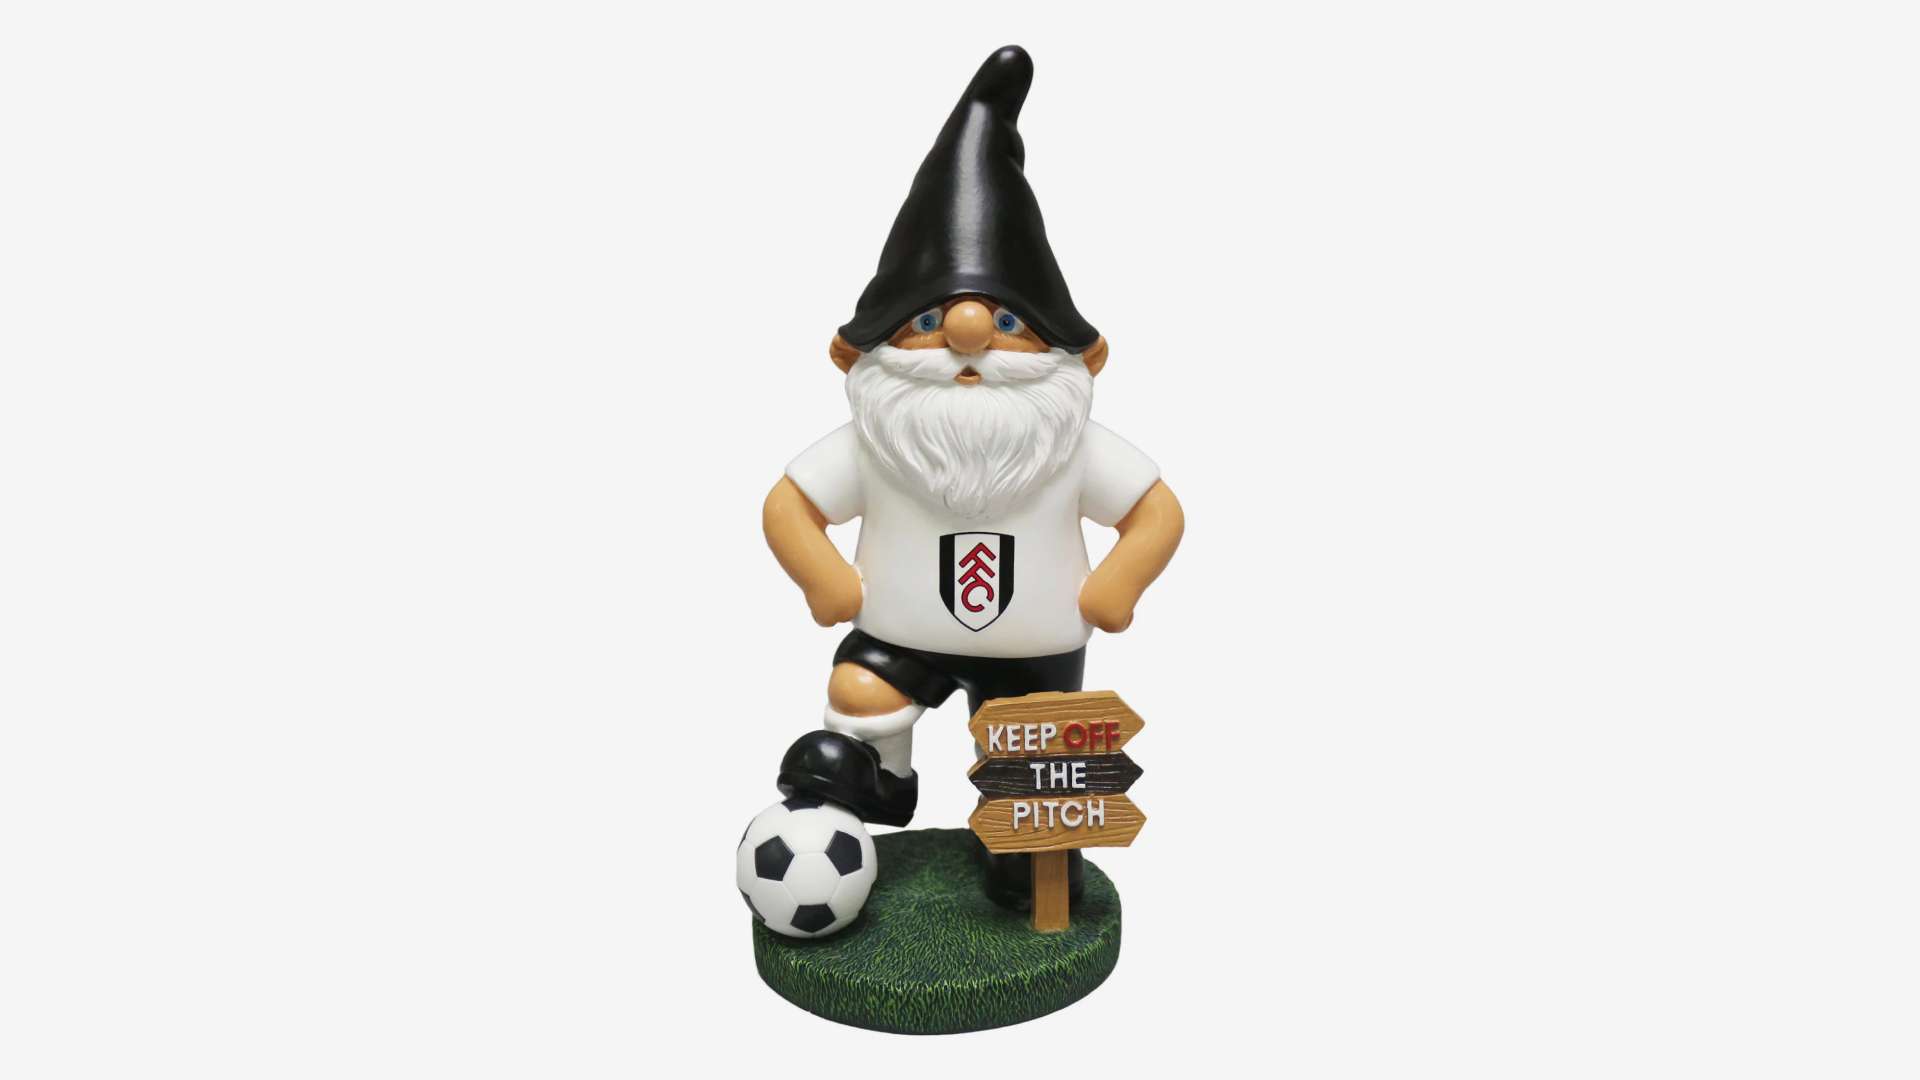 Fulham FC “Keep off the pitch” gnome